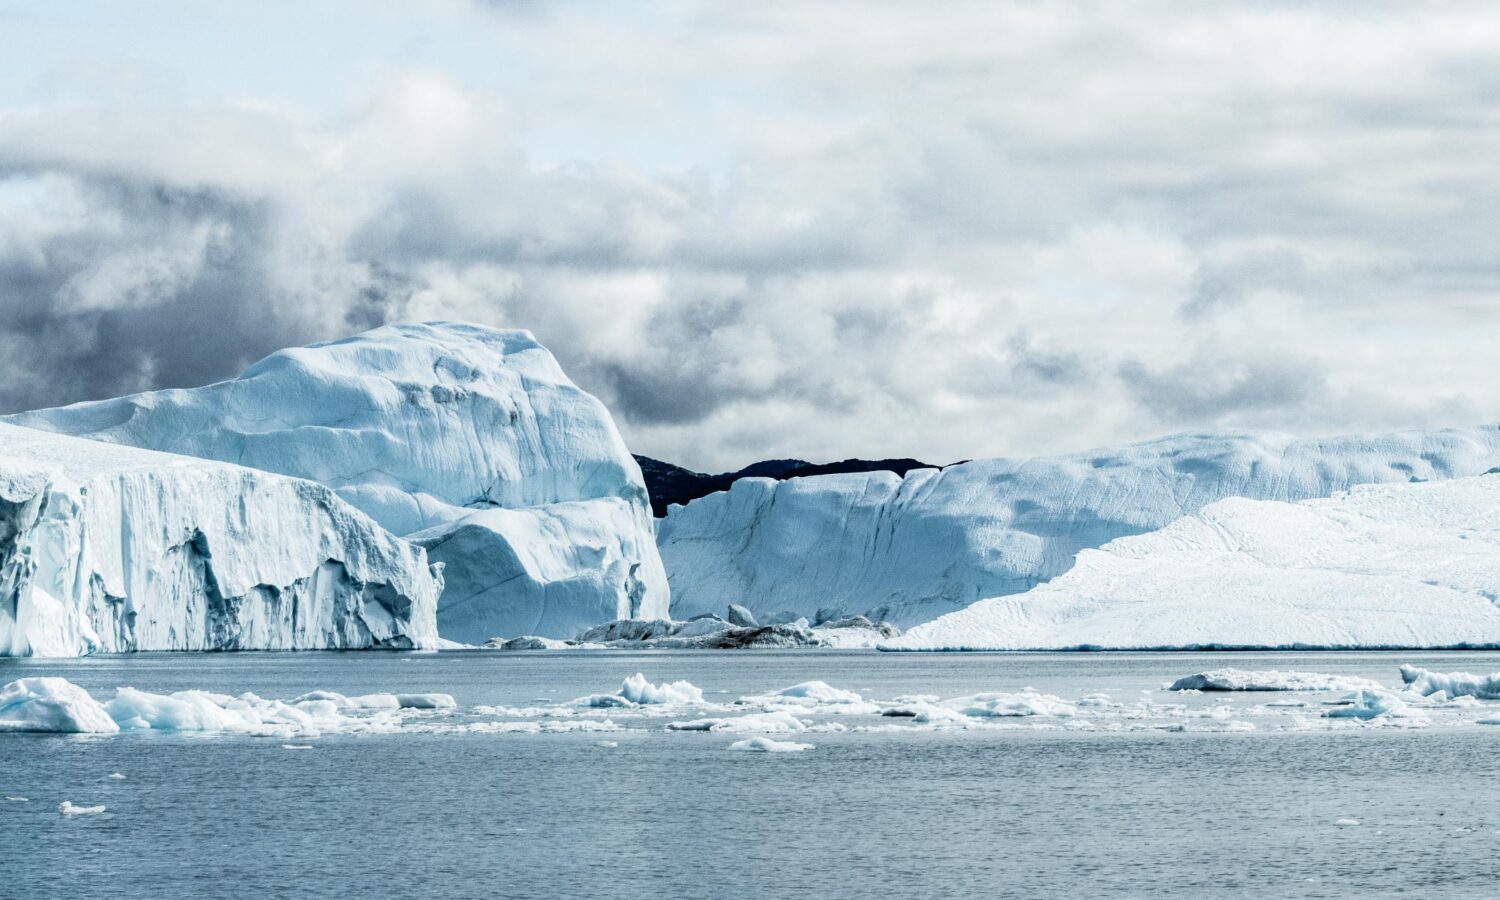 Navigating the ice labyrinth – join a Greenland whale watching tour if you want to explore the mesmerizing maze of colossal icebergs in Ilulissat's Disko Bay.